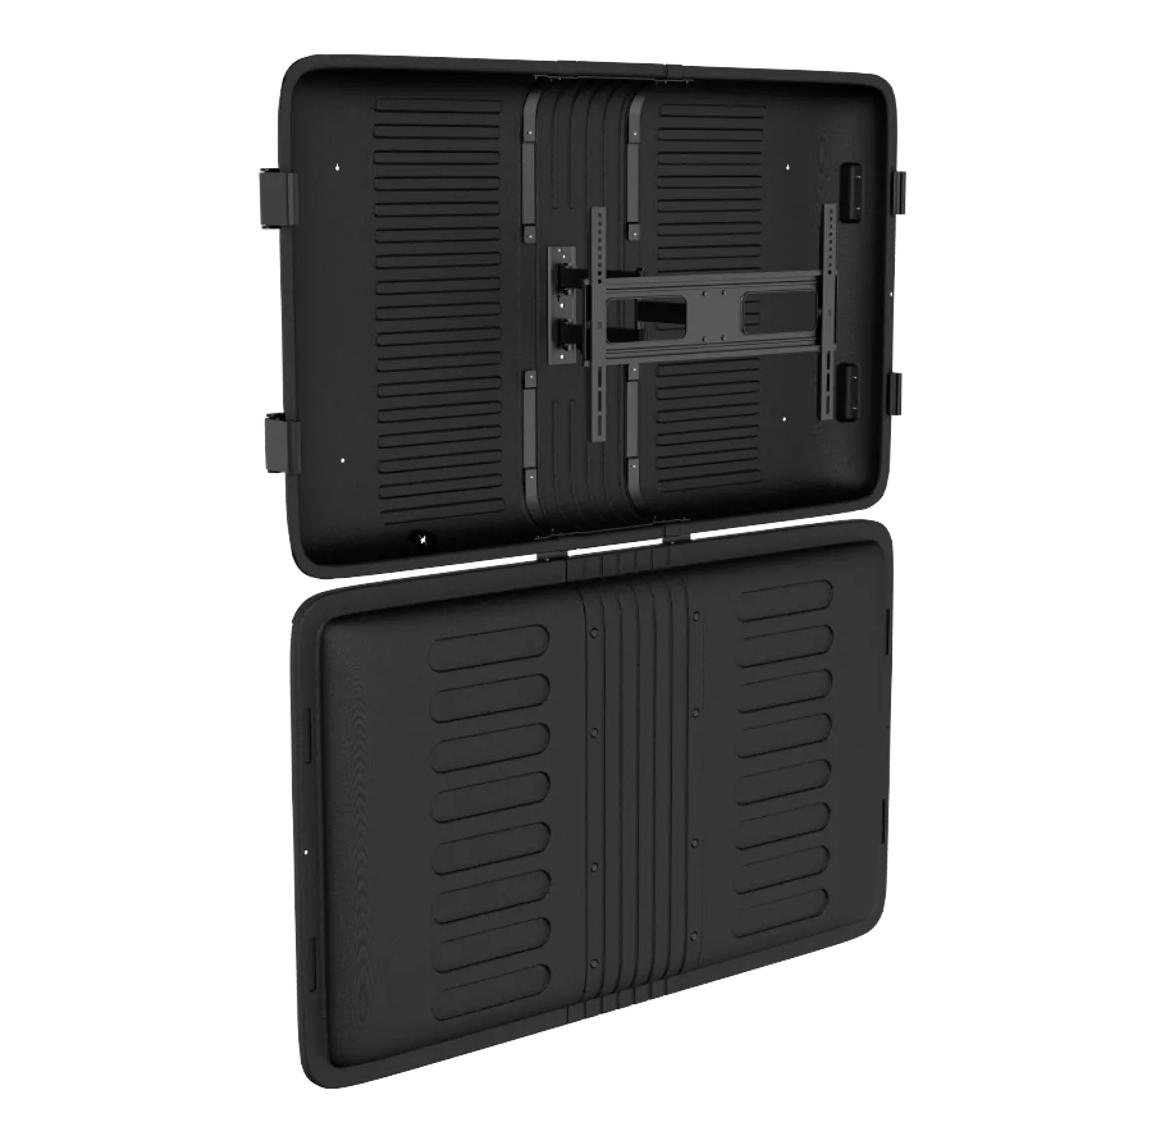 Shop Now for The TV Shield E-Series for Weatherproof TV Protection - Outdoor TV Enclosure be PEC